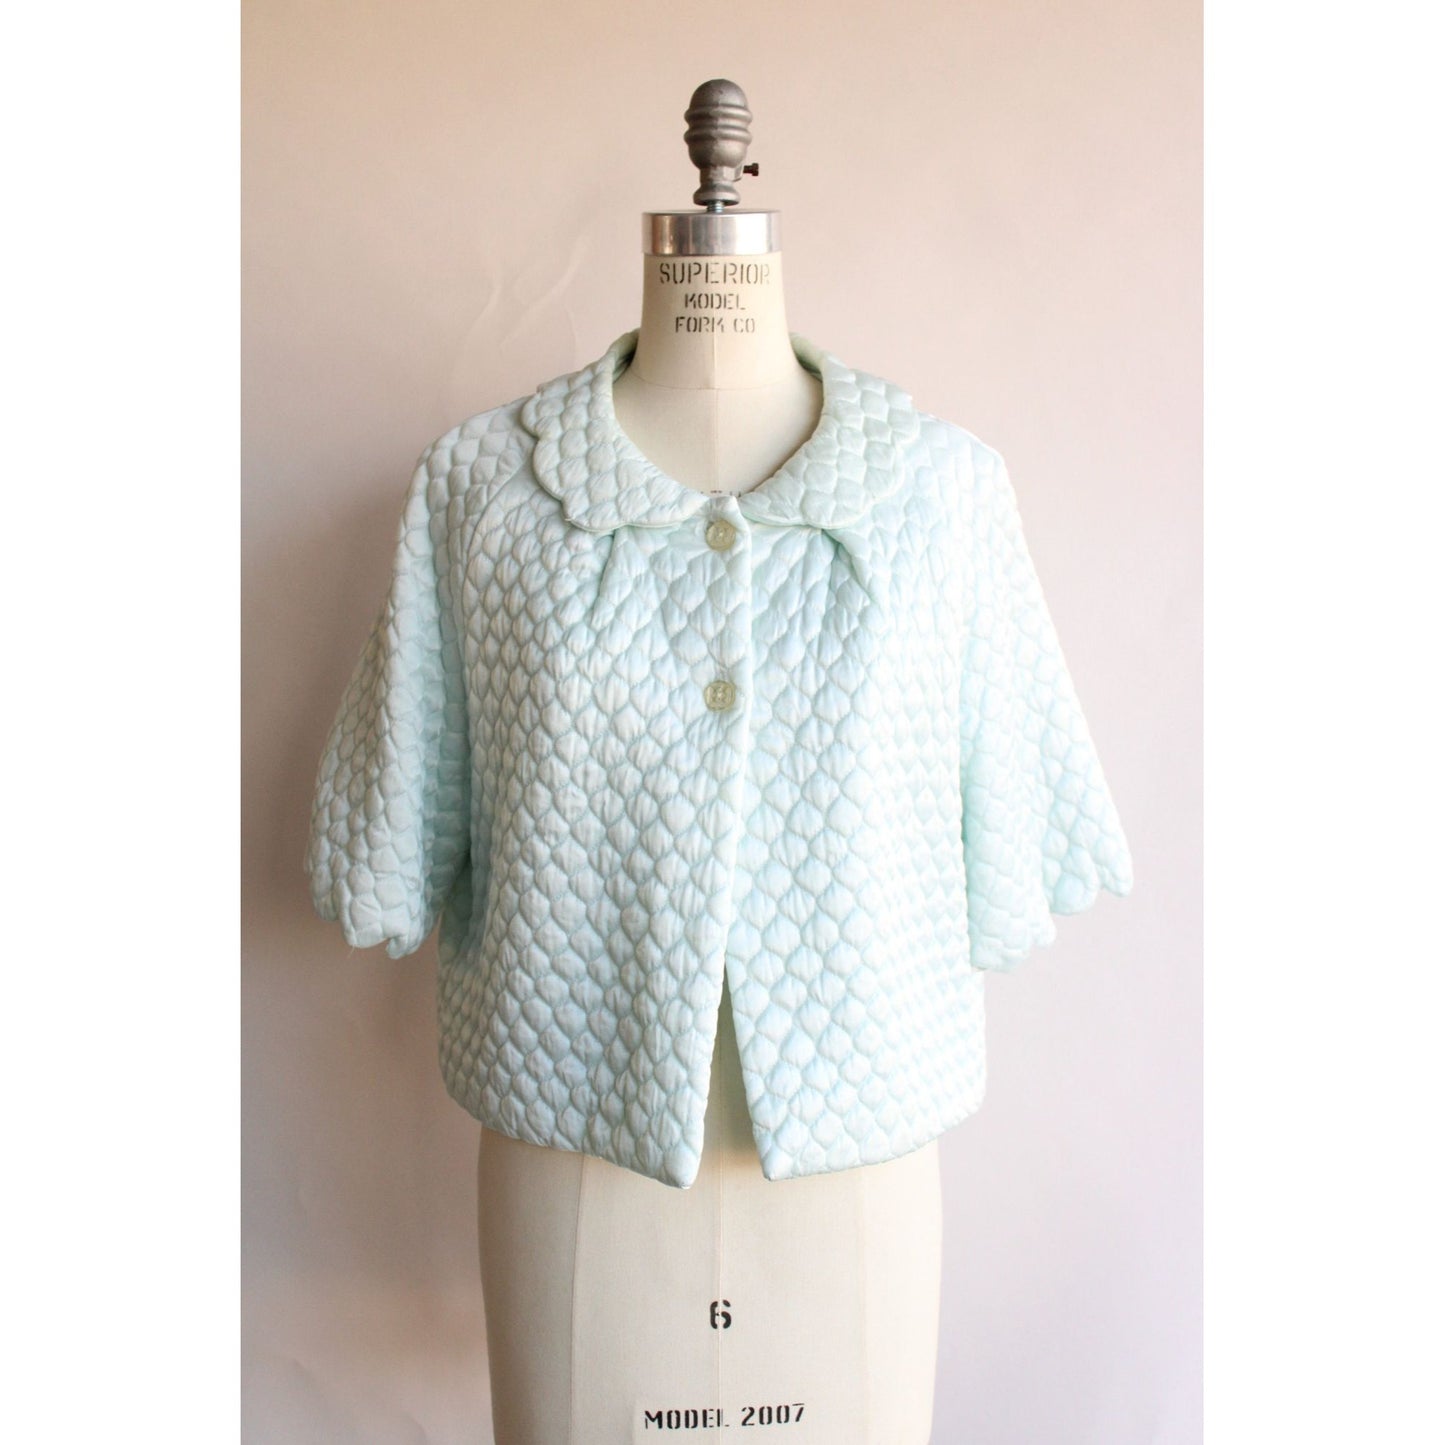 Vintage 1960s Blue Quilted Bed Jacket with Peter Pan Collar